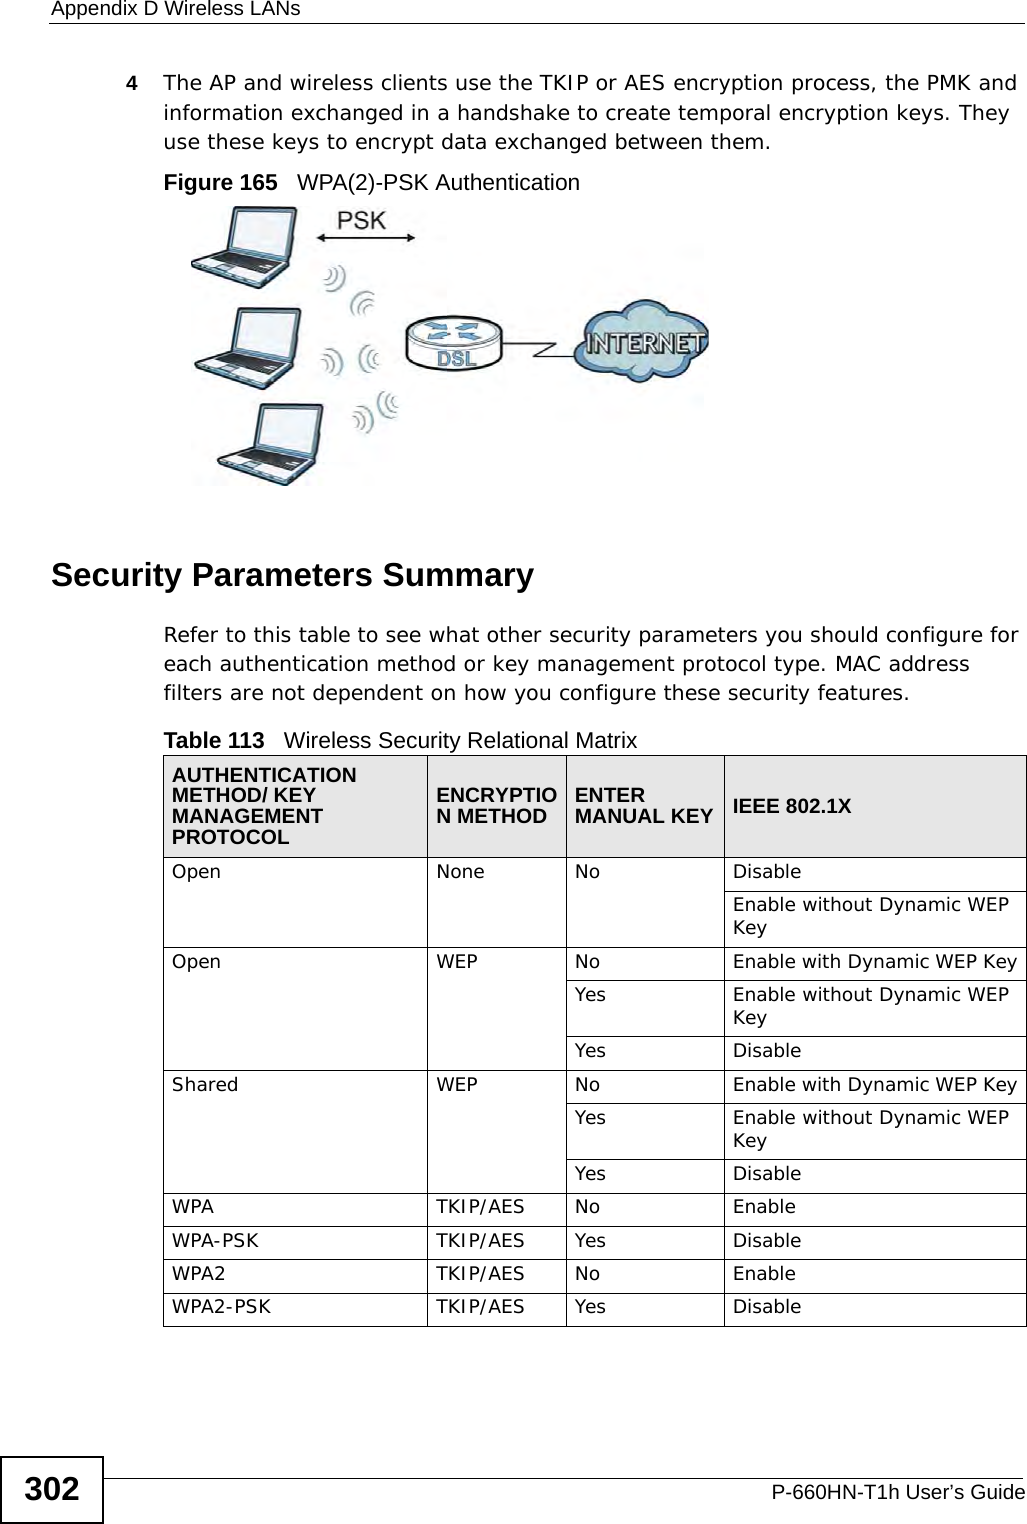 Appendix D Wireless LANsP-660HN-T1h User’s Guide3024The AP and wireless clients use the TKIP or AES encryption process, the PMK and information exchanged in a handshake to create temporal encryption keys. They use these keys to encrypt data exchanged between them.Figure 165   WPA(2)-PSK AuthenticationSecurity Parameters SummaryRefer to this table to see what other security parameters you should configure for each authentication method or key management protocol type. MAC address filters are not dependent on how you configure these security features.Table 113   Wireless Security Relational MatrixAUTHENTICATION METHOD/ KEY MANAGEMENT PROTOCOLENCRYPTION METHOD ENTER MANUAL KEY IEEE 802.1XOpen None No DisableEnable without Dynamic WEP KeyOpen WEP No           Enable with Dynamic WEP KeyYes Enable without Dynamic WEP KeyYes DisableShared WEP  No           Enable with Dynamic WEP KeyYes Enable without Dynamic WEP KeyYes DisableWPA  TKIP/AES No EnableWPA-PSK  TKIP/AES Yes DisableWPA2 TKIP/AES No EnableWPA2-PSK  TKIP/AES Yes Disable